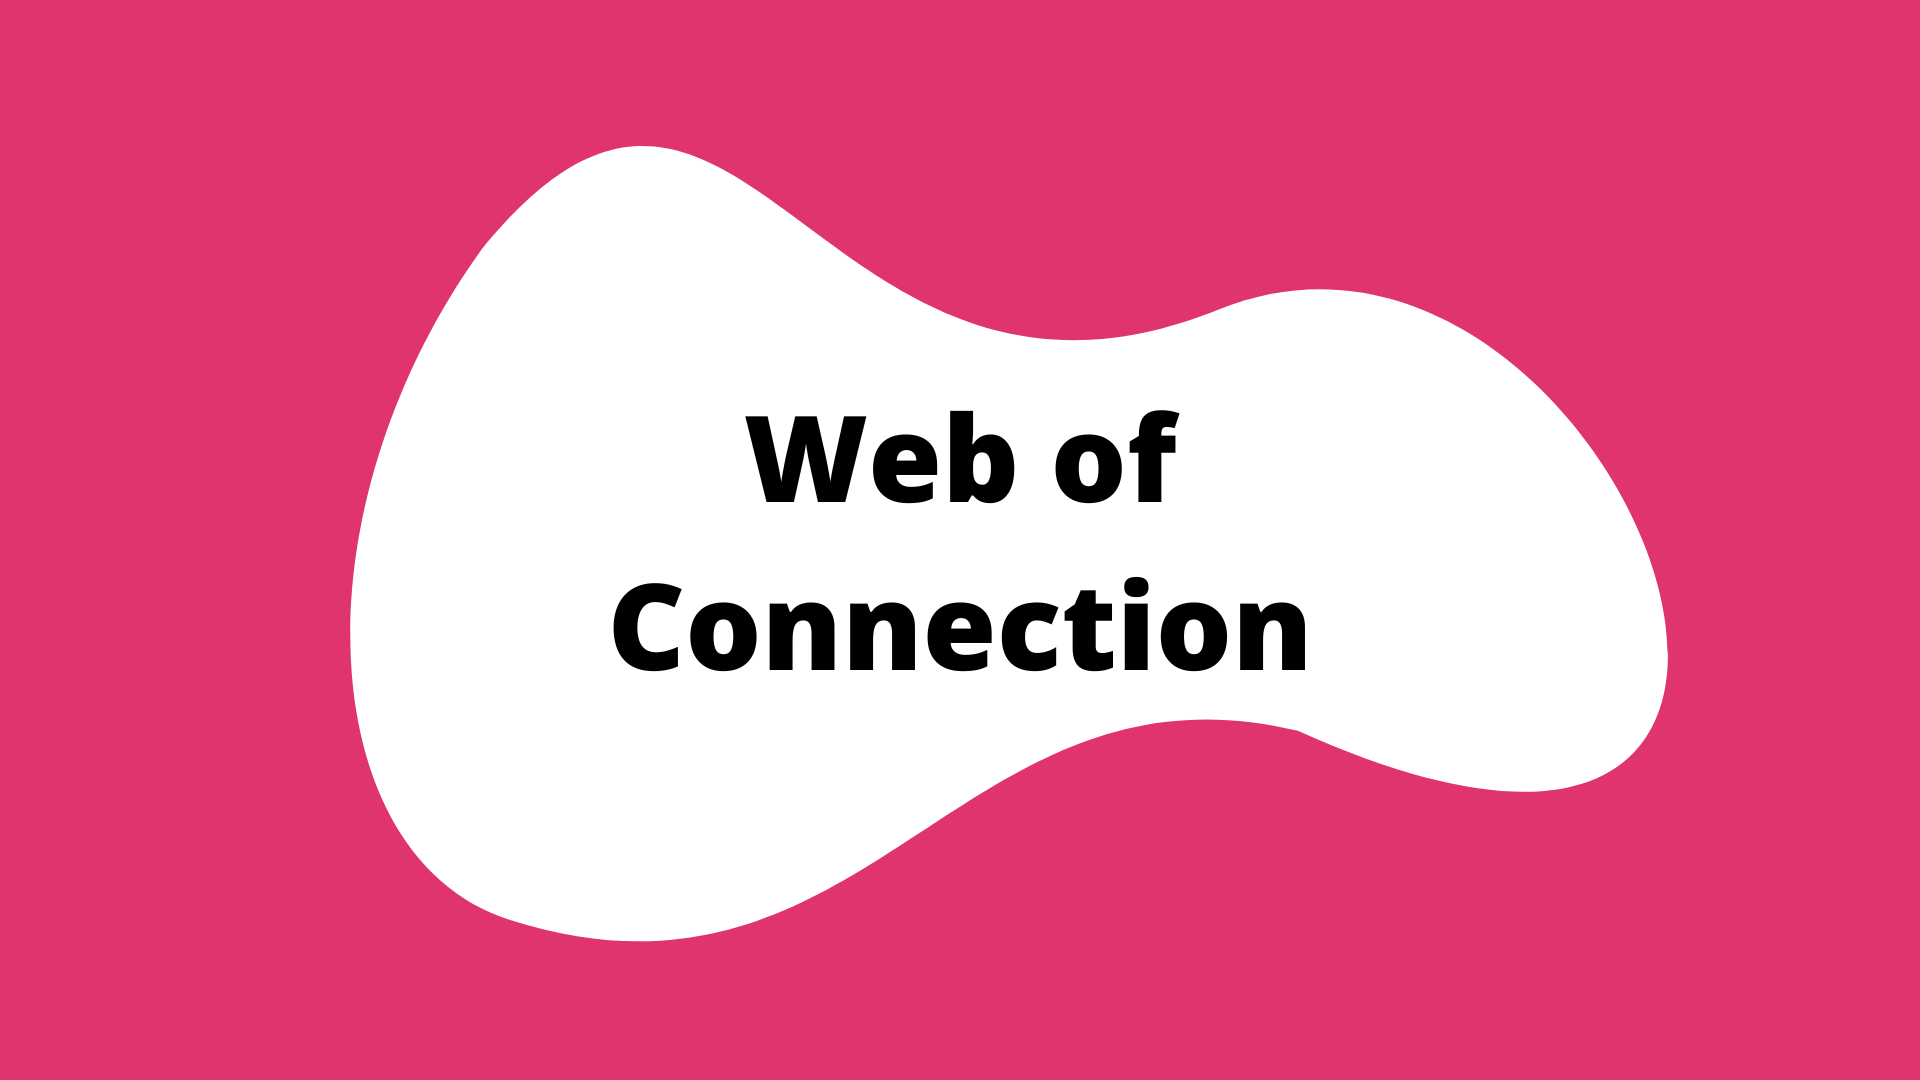 Web of Connection